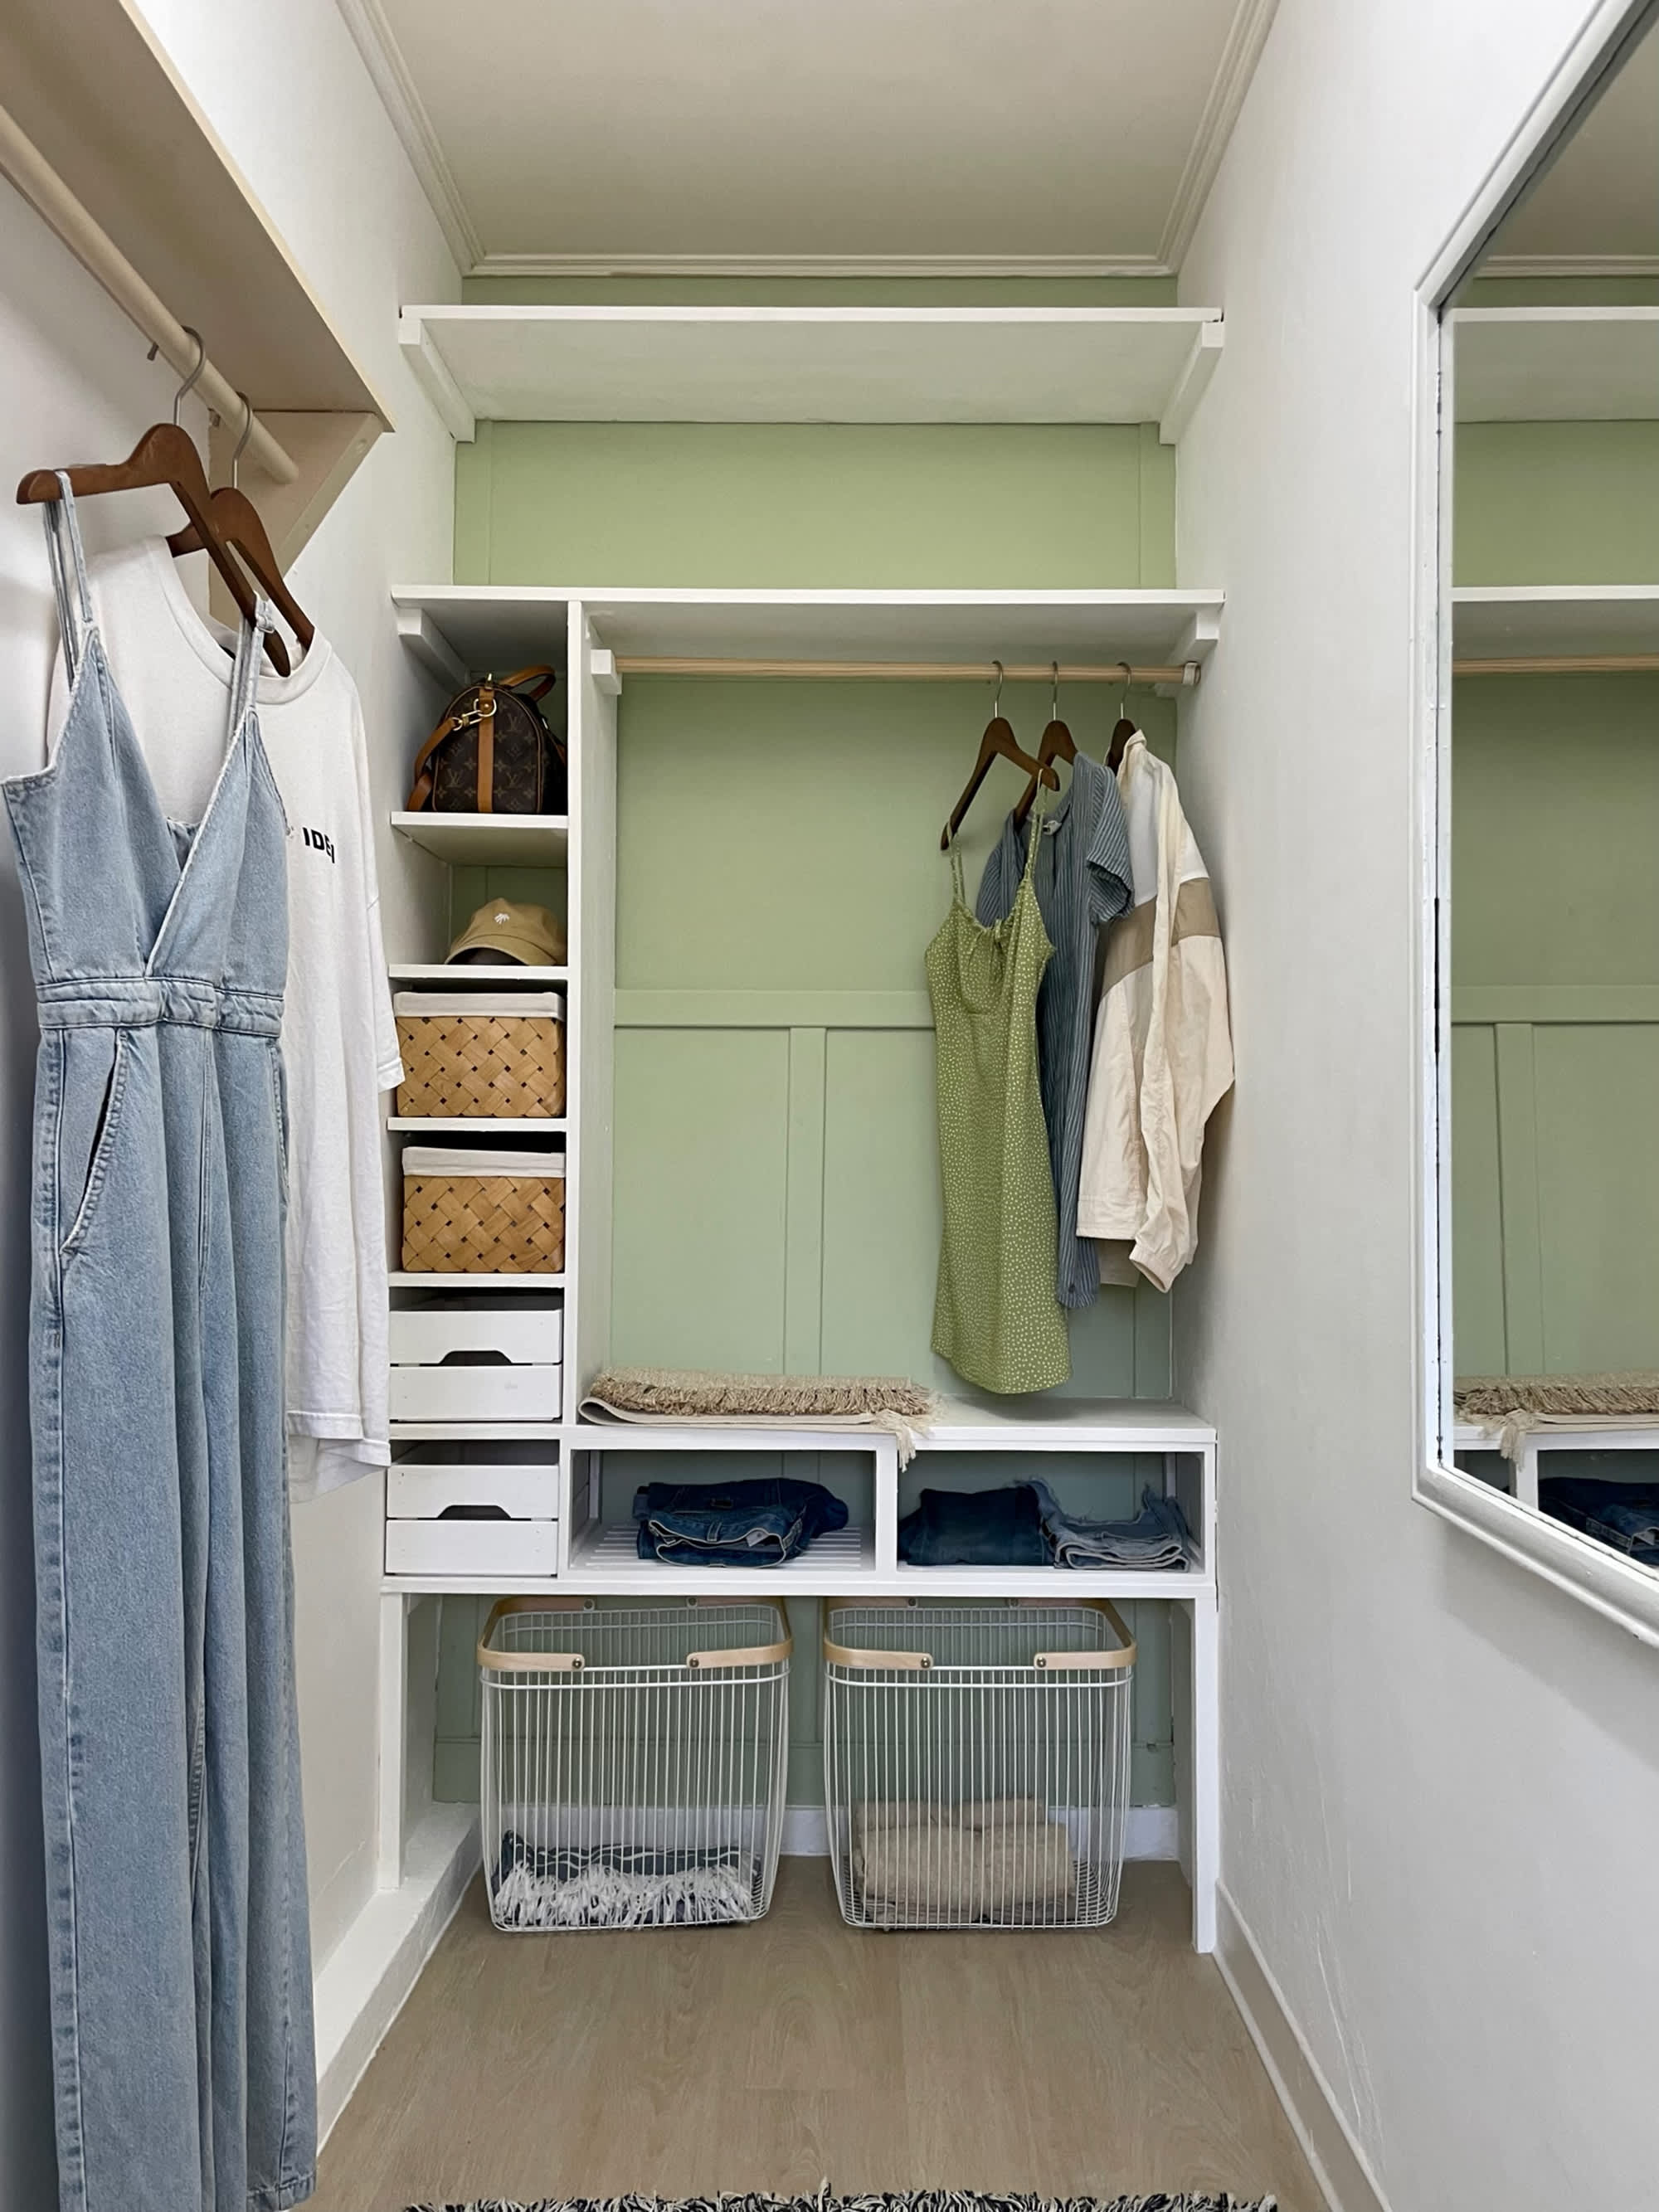 The Best Walk-in Closet Ideas, Design and Inspiration